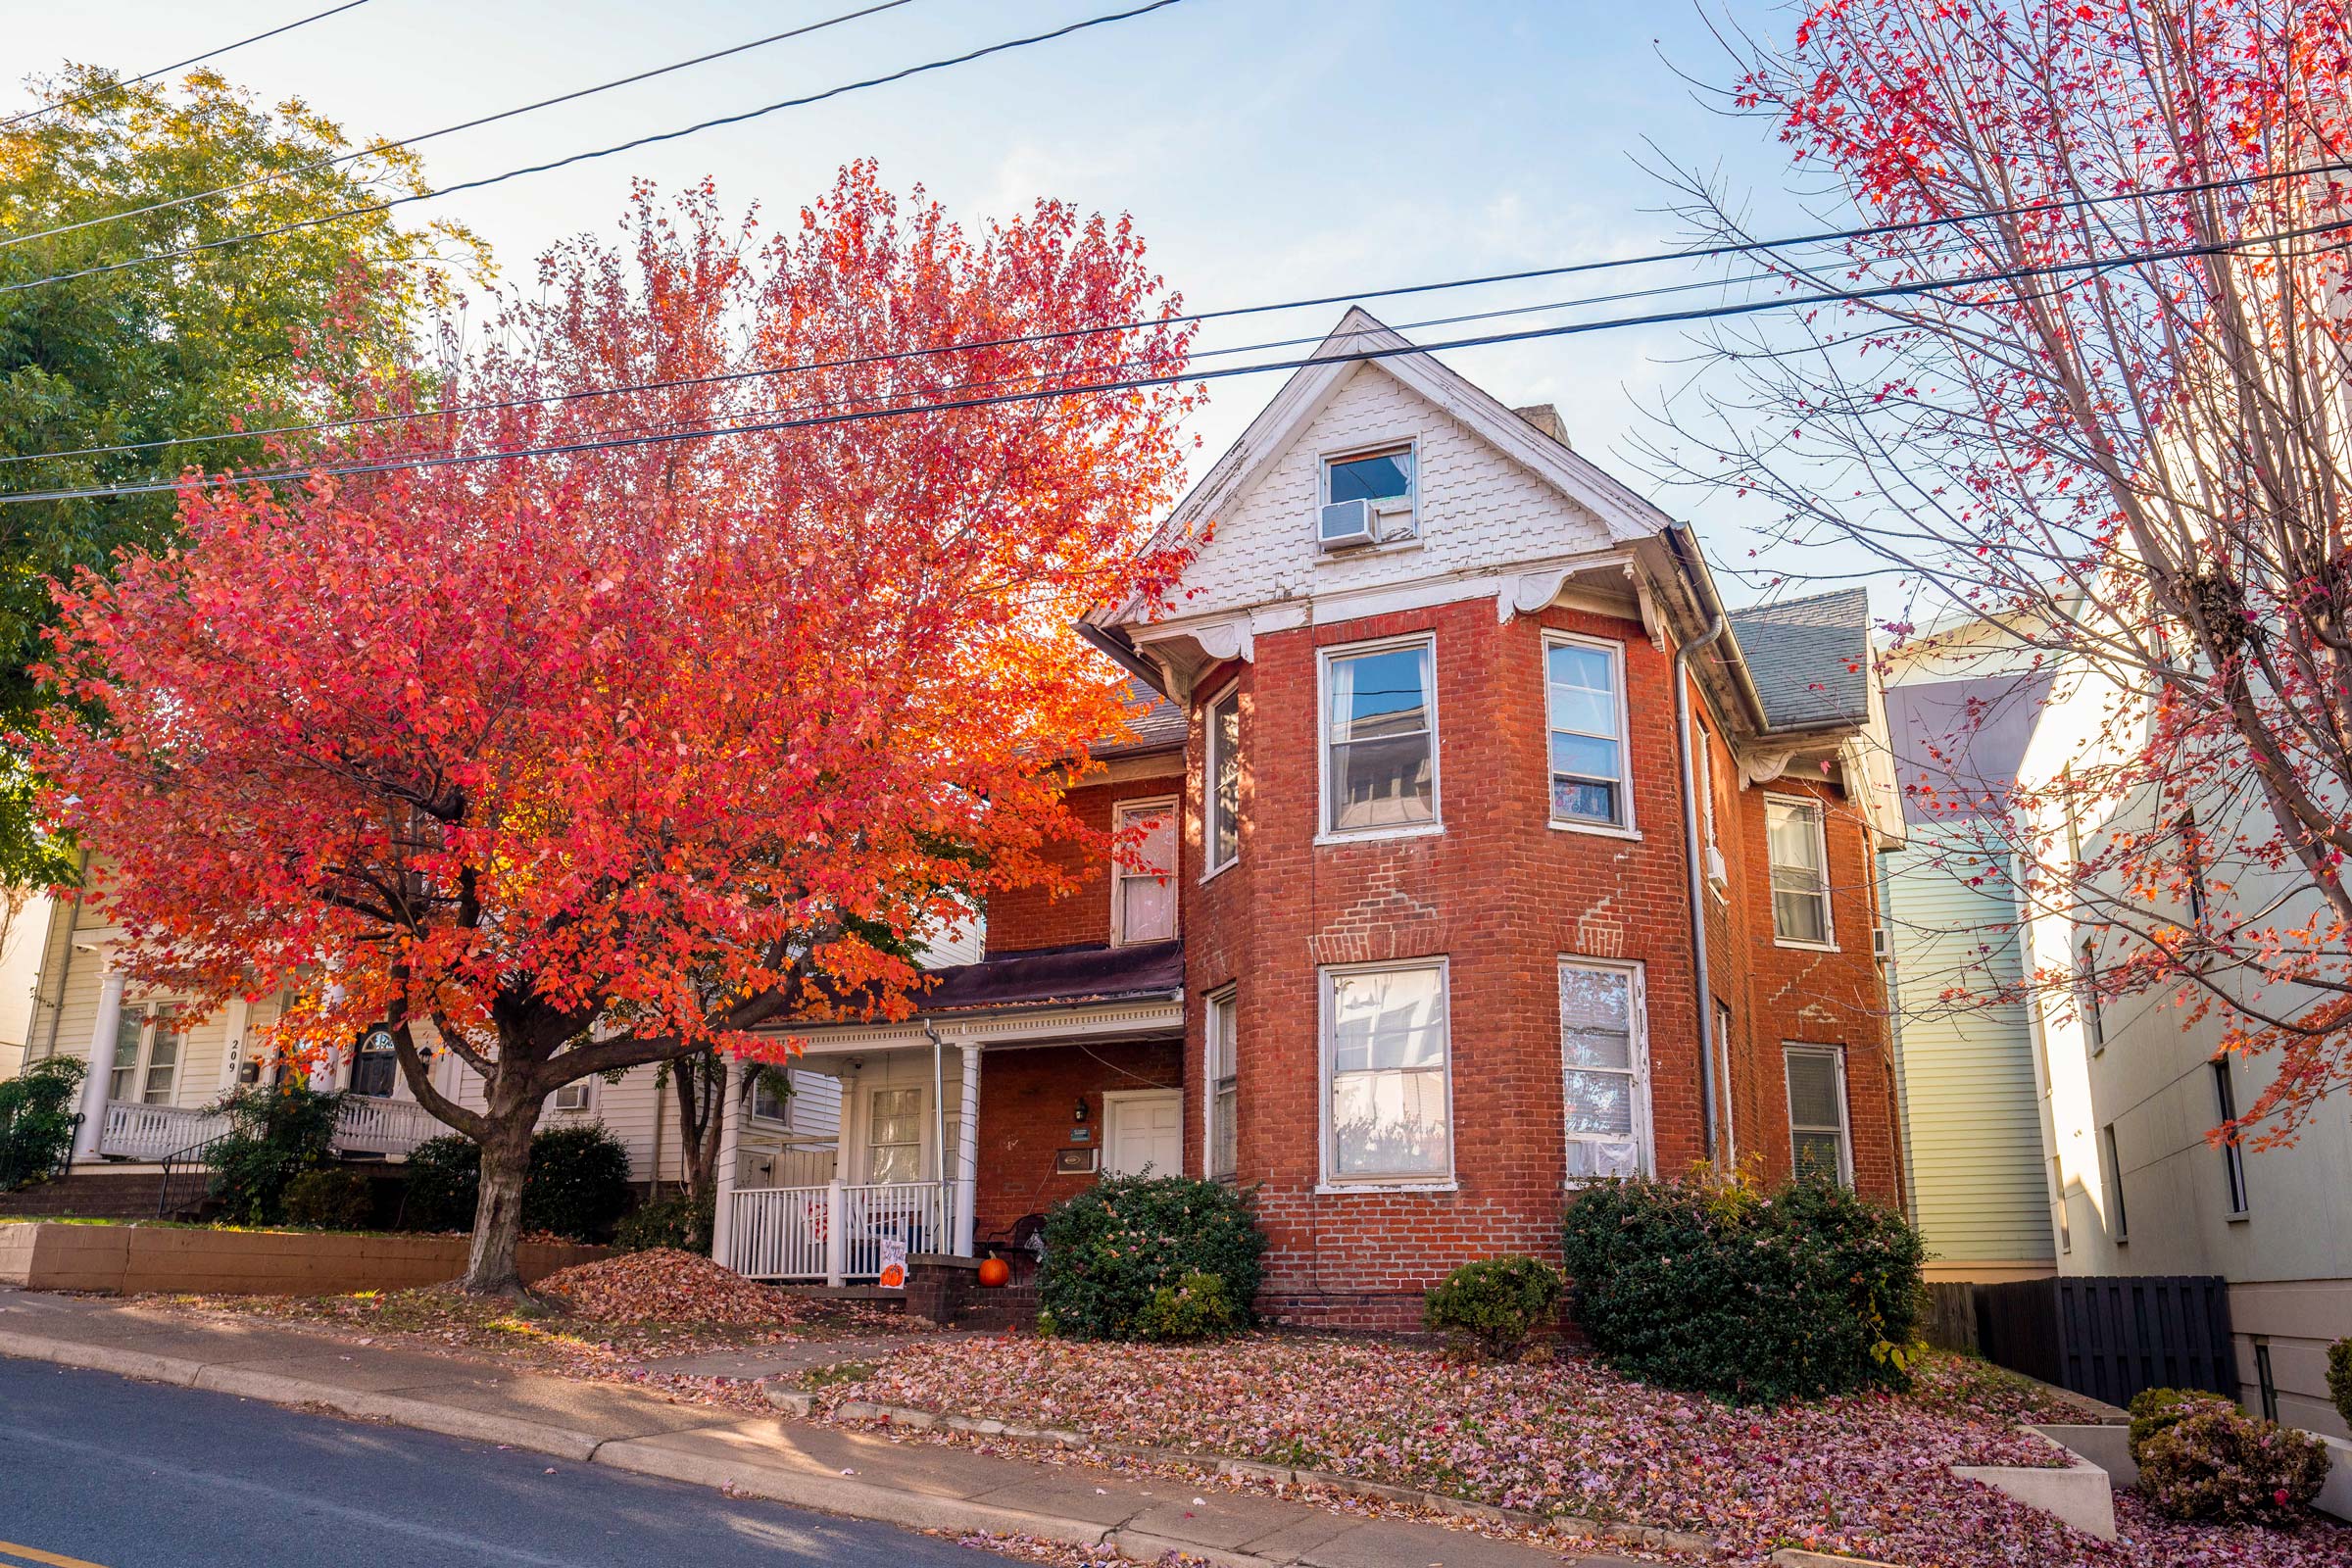 Red tree in front of a brick house